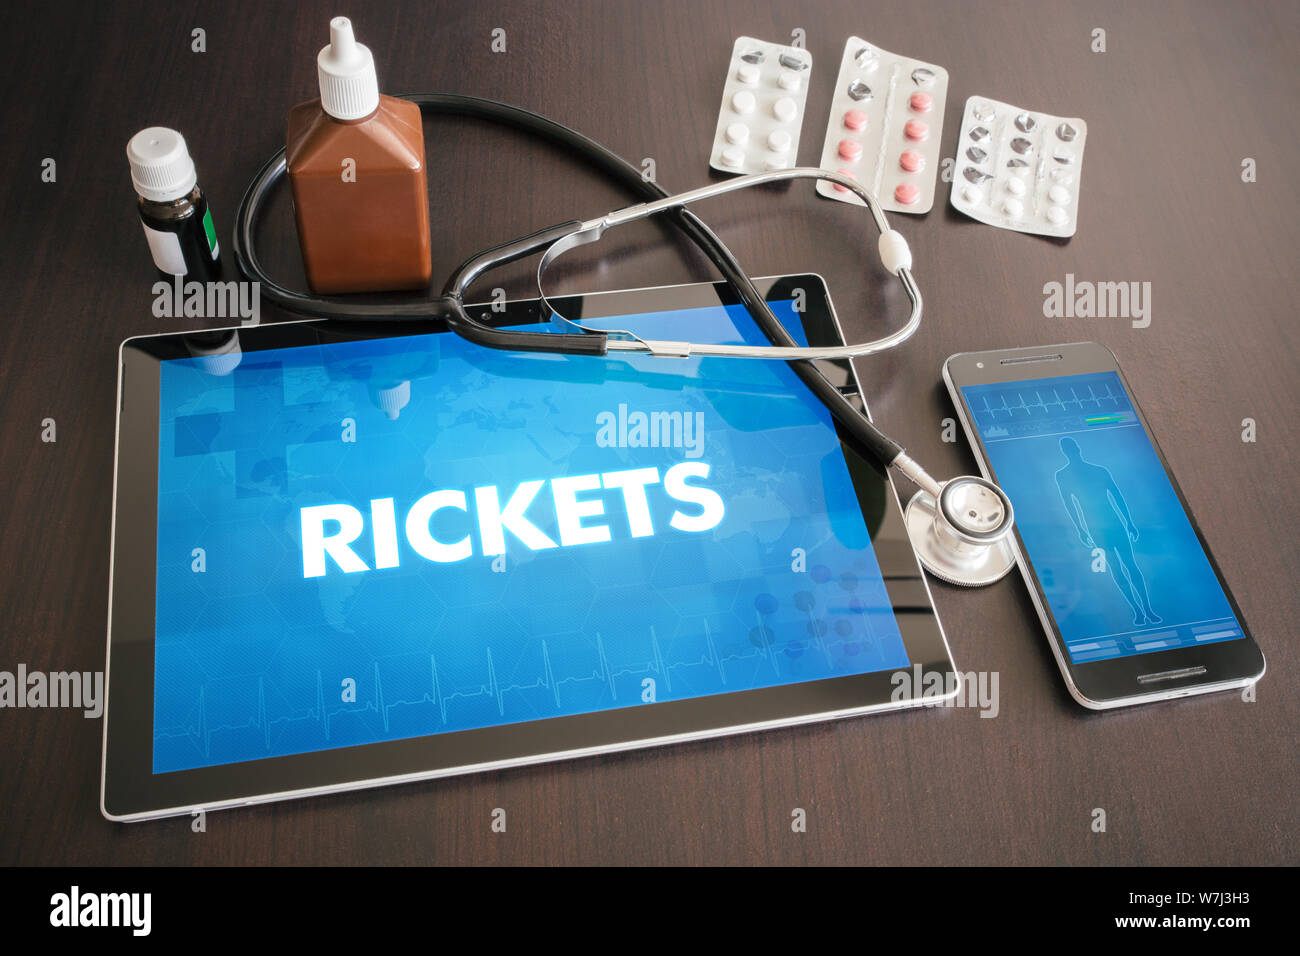 Rickets (endocrine disease) diagnosis medical concept on tablet screen with stethoscope. Stock Photo